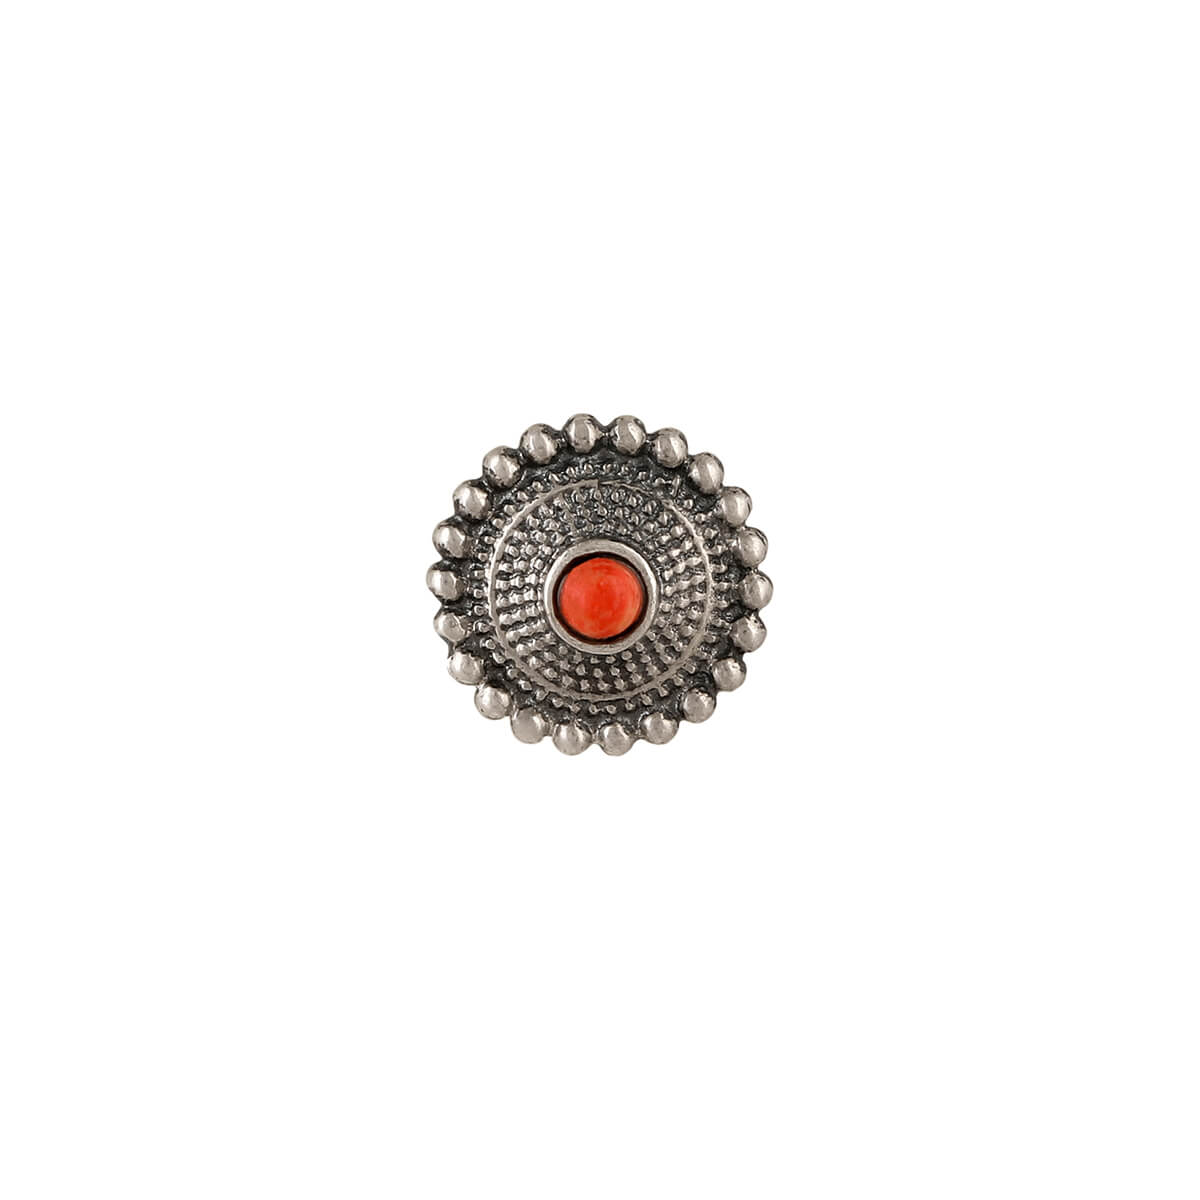 Sara Silver Nose Pin - Pierced, Coral Stone by MOHA